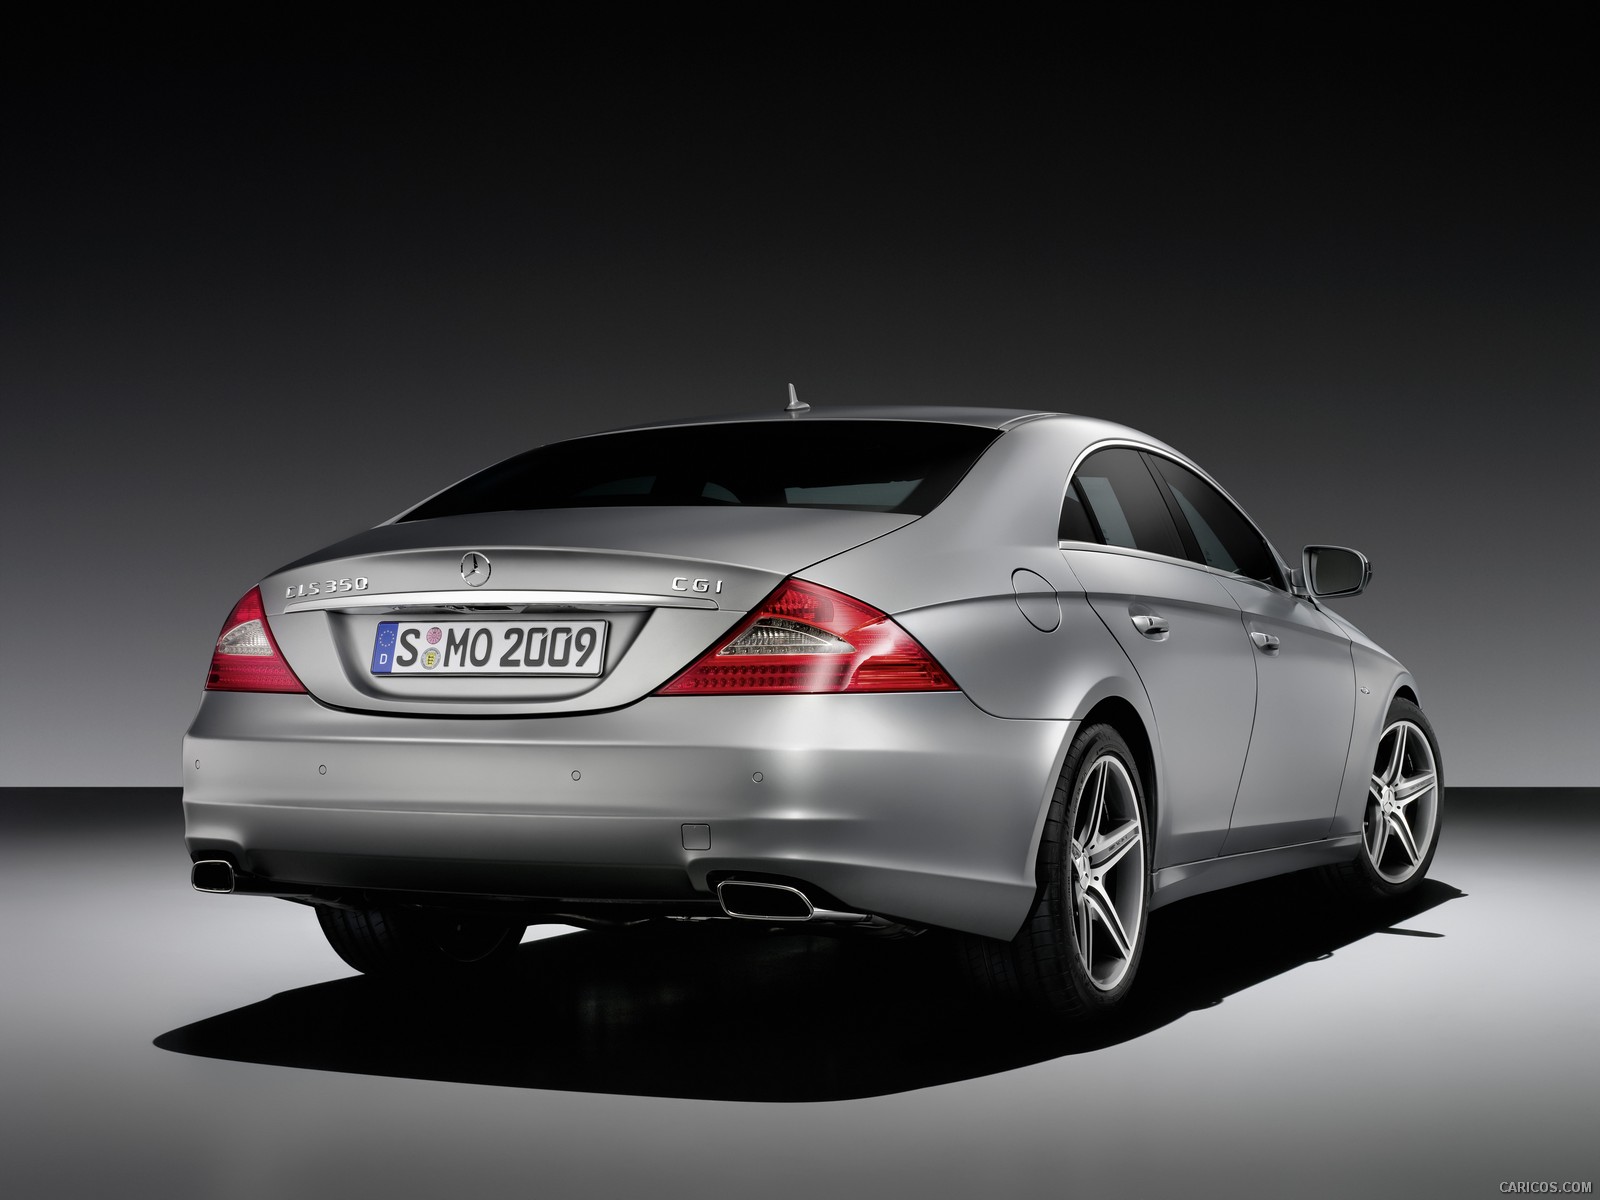 Mercedes-Benz CLS Grand Edition (2009)  - Rear Angle , #4 of 17